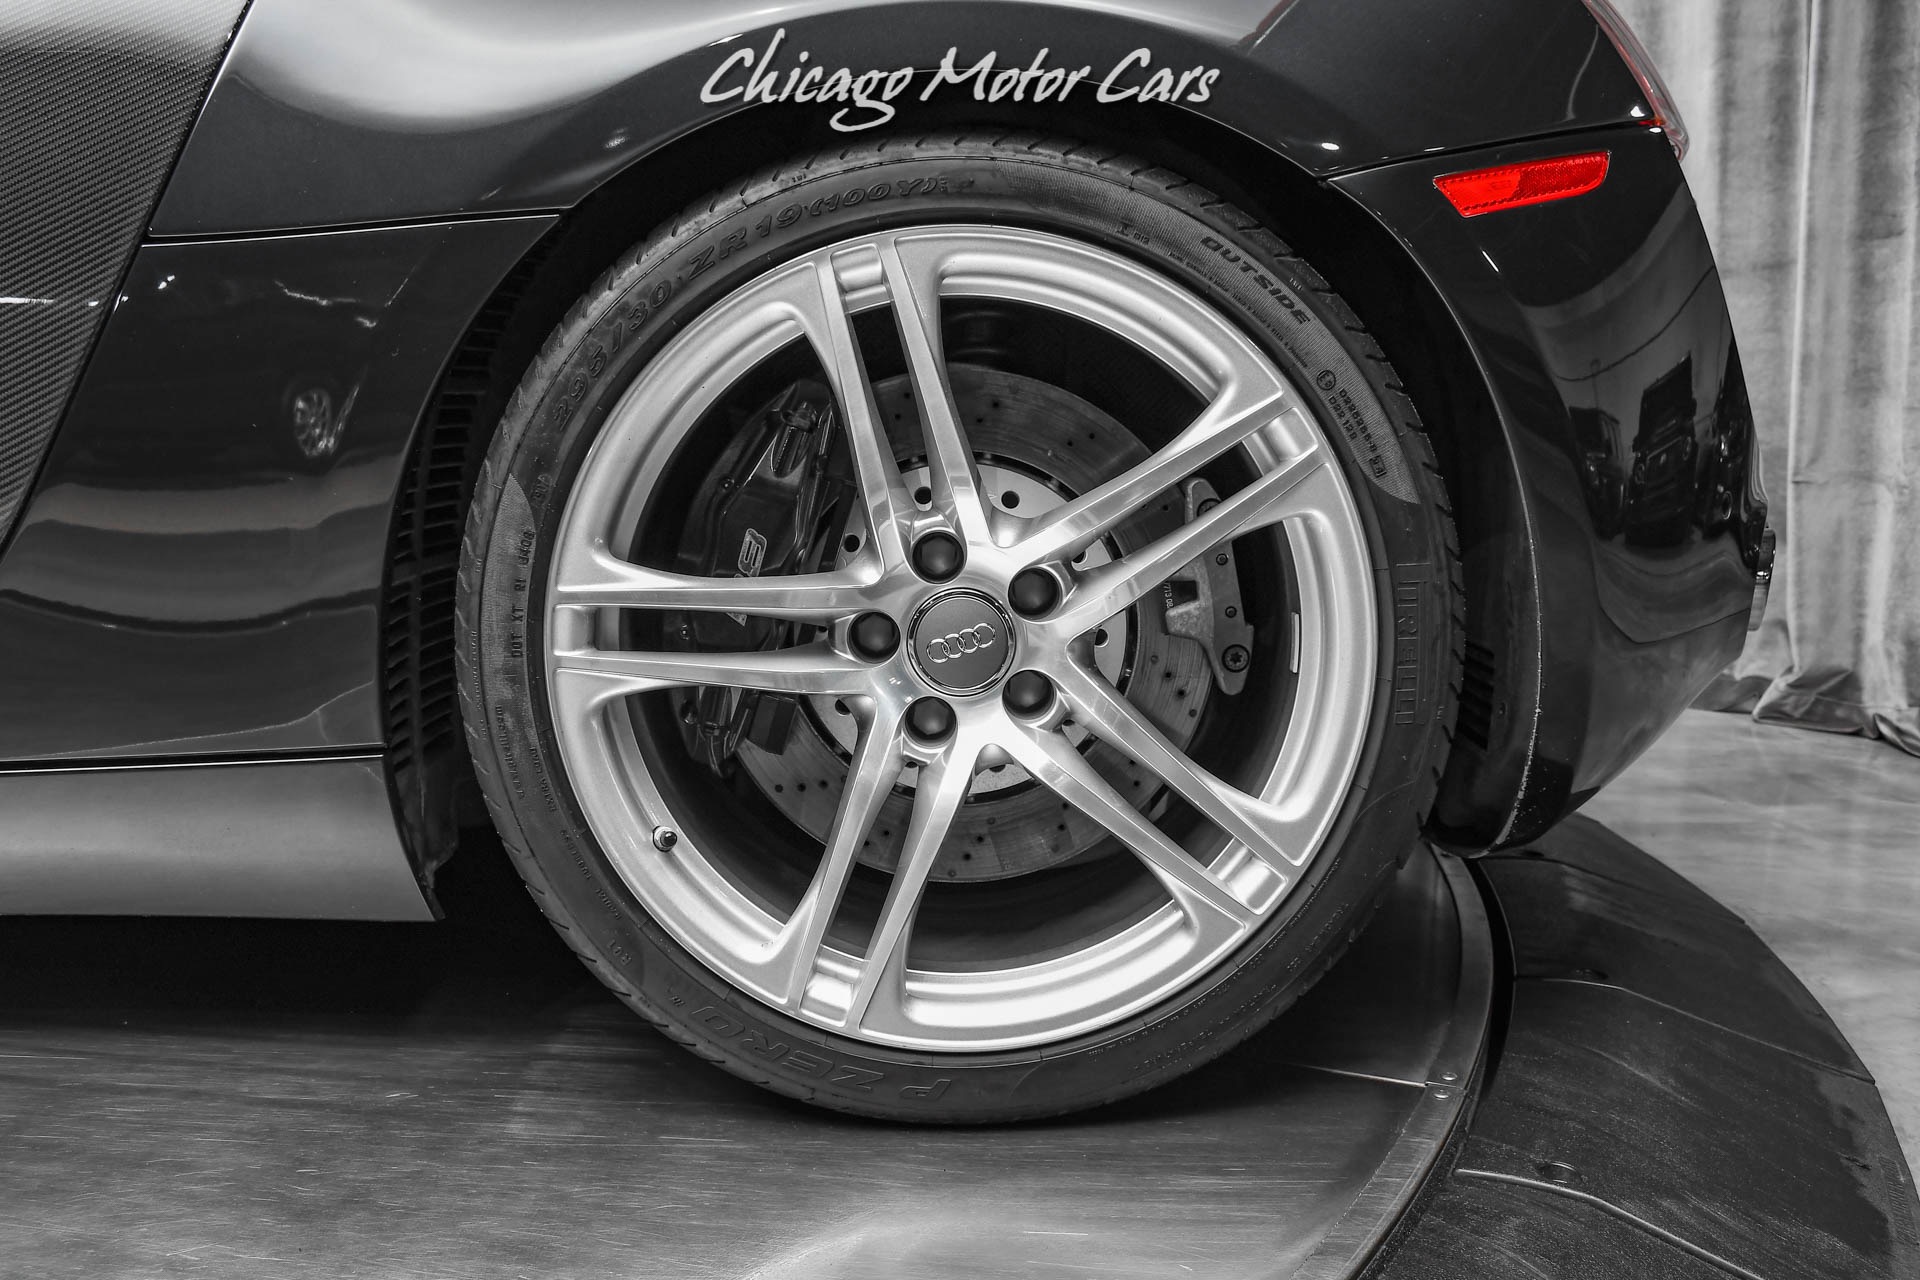 Used-2008-Audi-R8-quattro-Coupe-RARE-6-Speed-Gated-Manual-Carbon-Fiber-LOW-mIles-LOADED